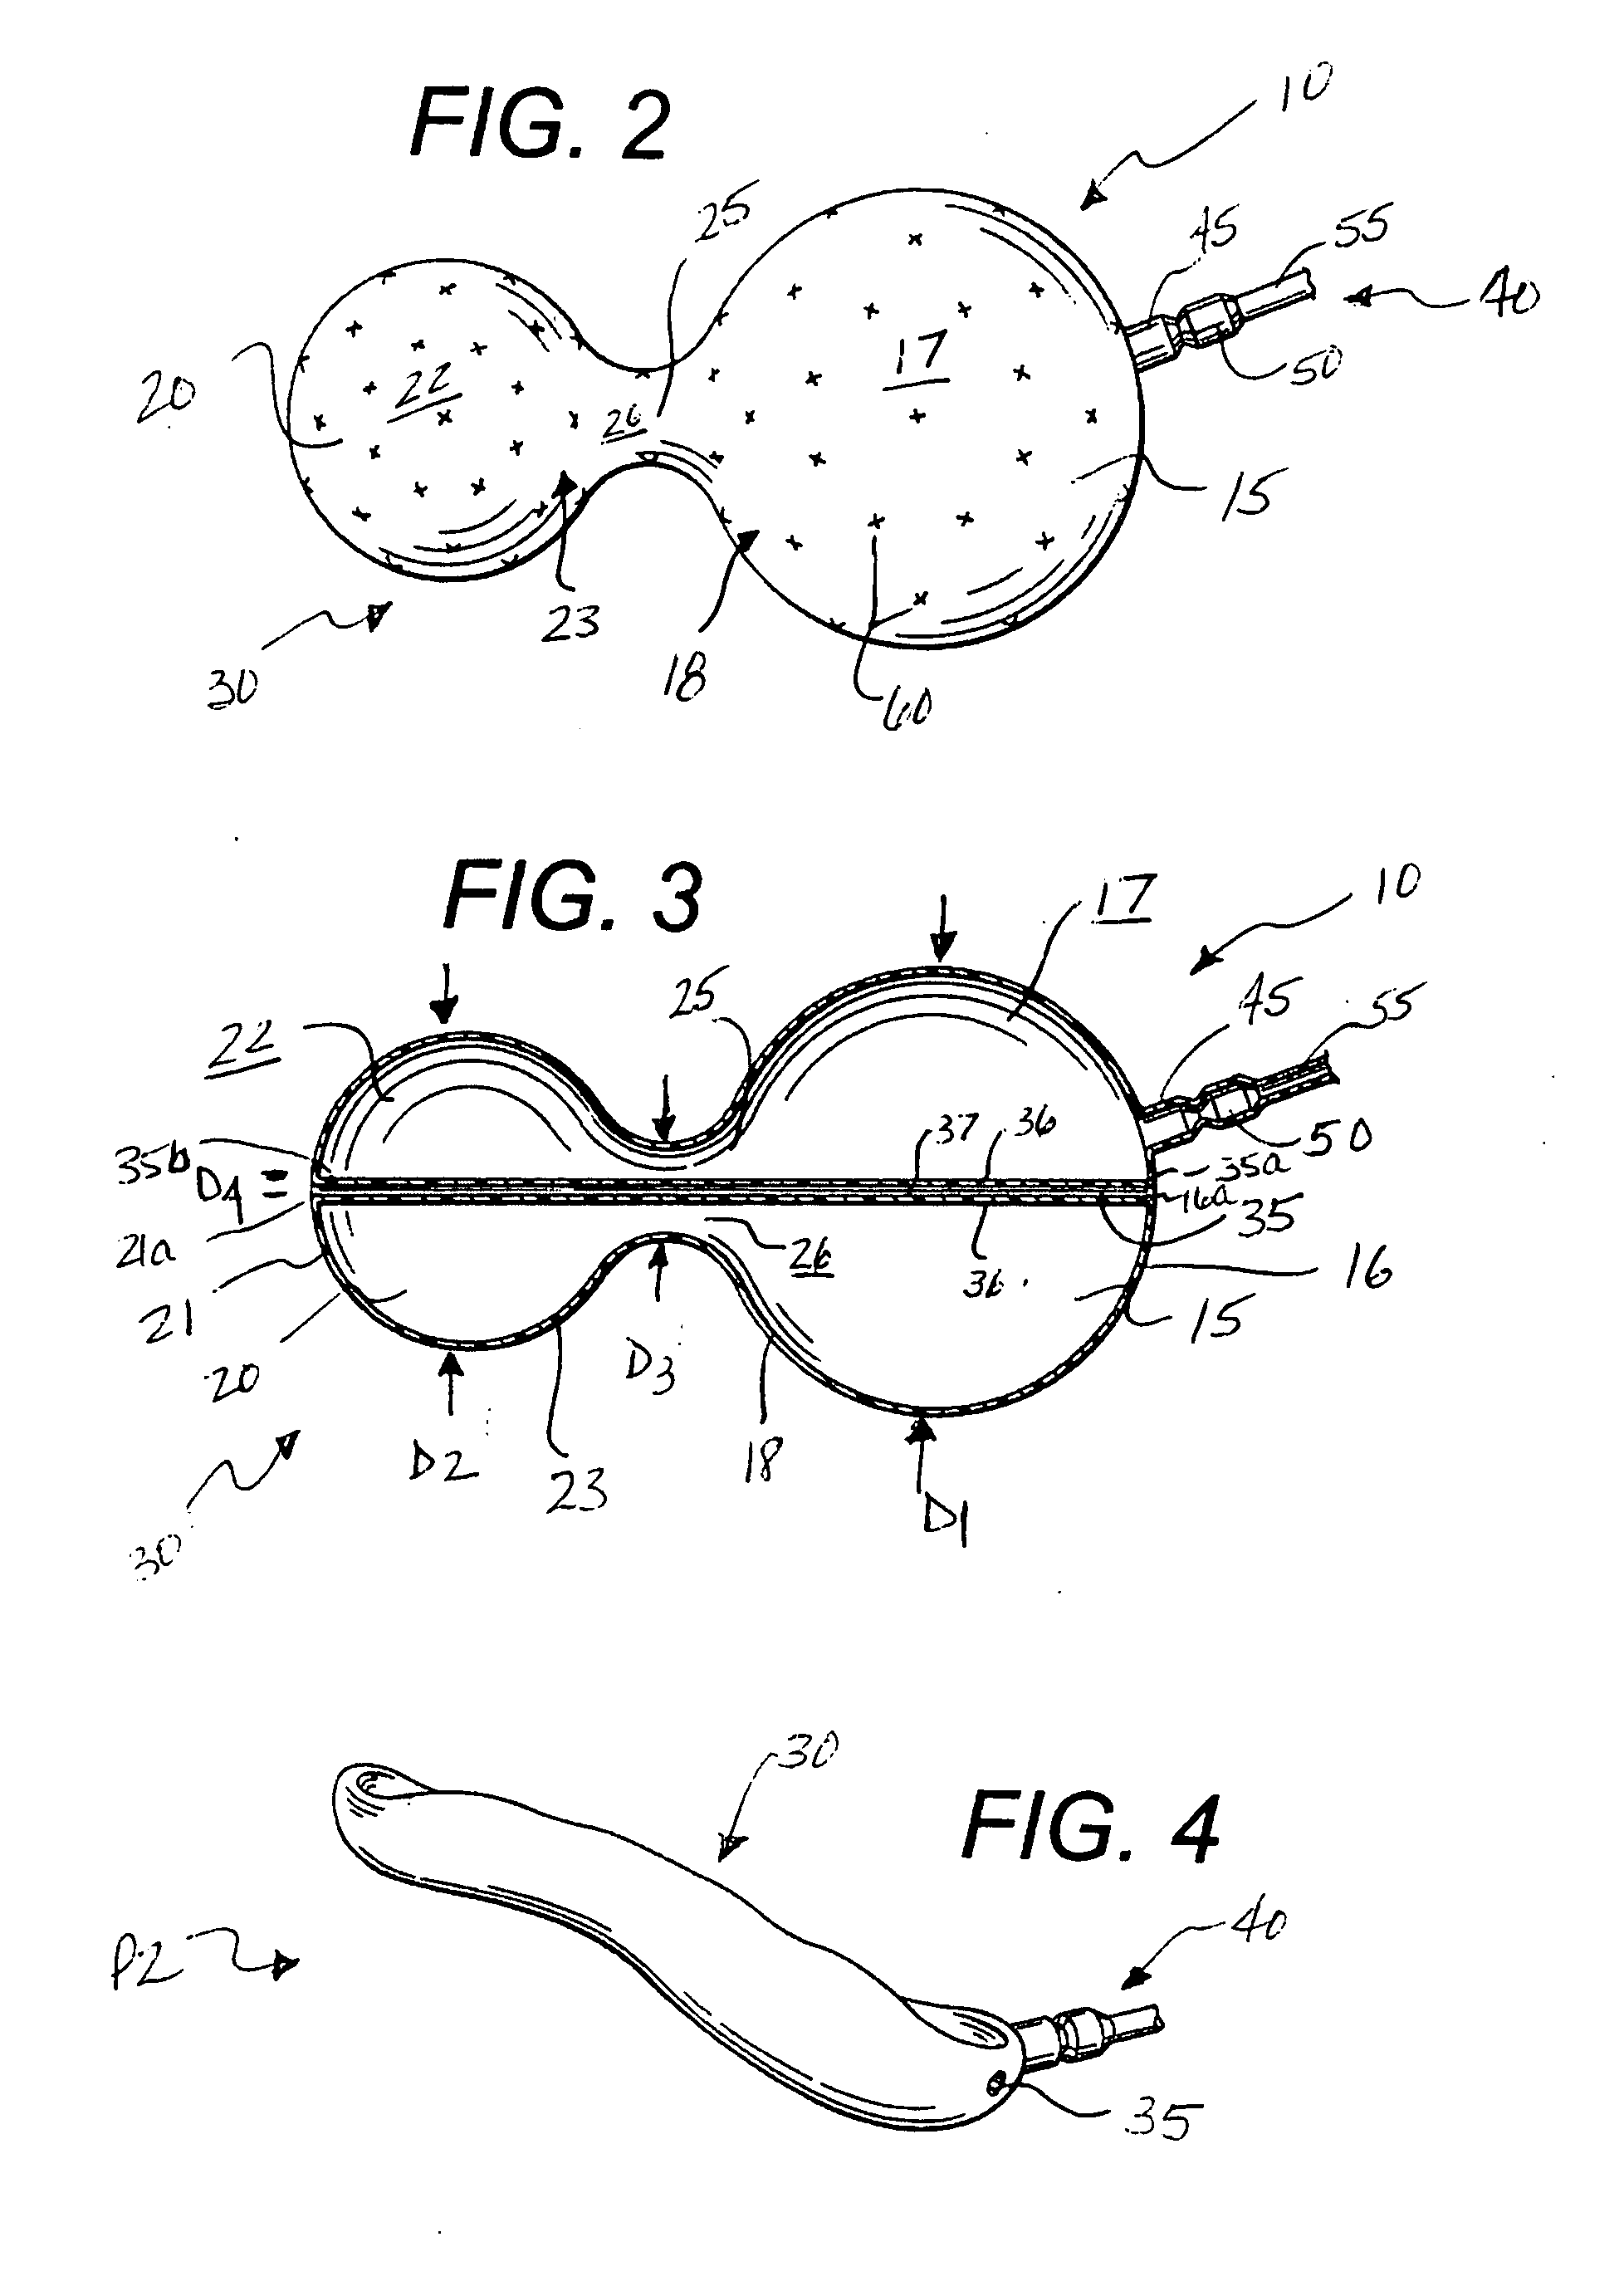 Method for treating obesity using an implantable weight loss device